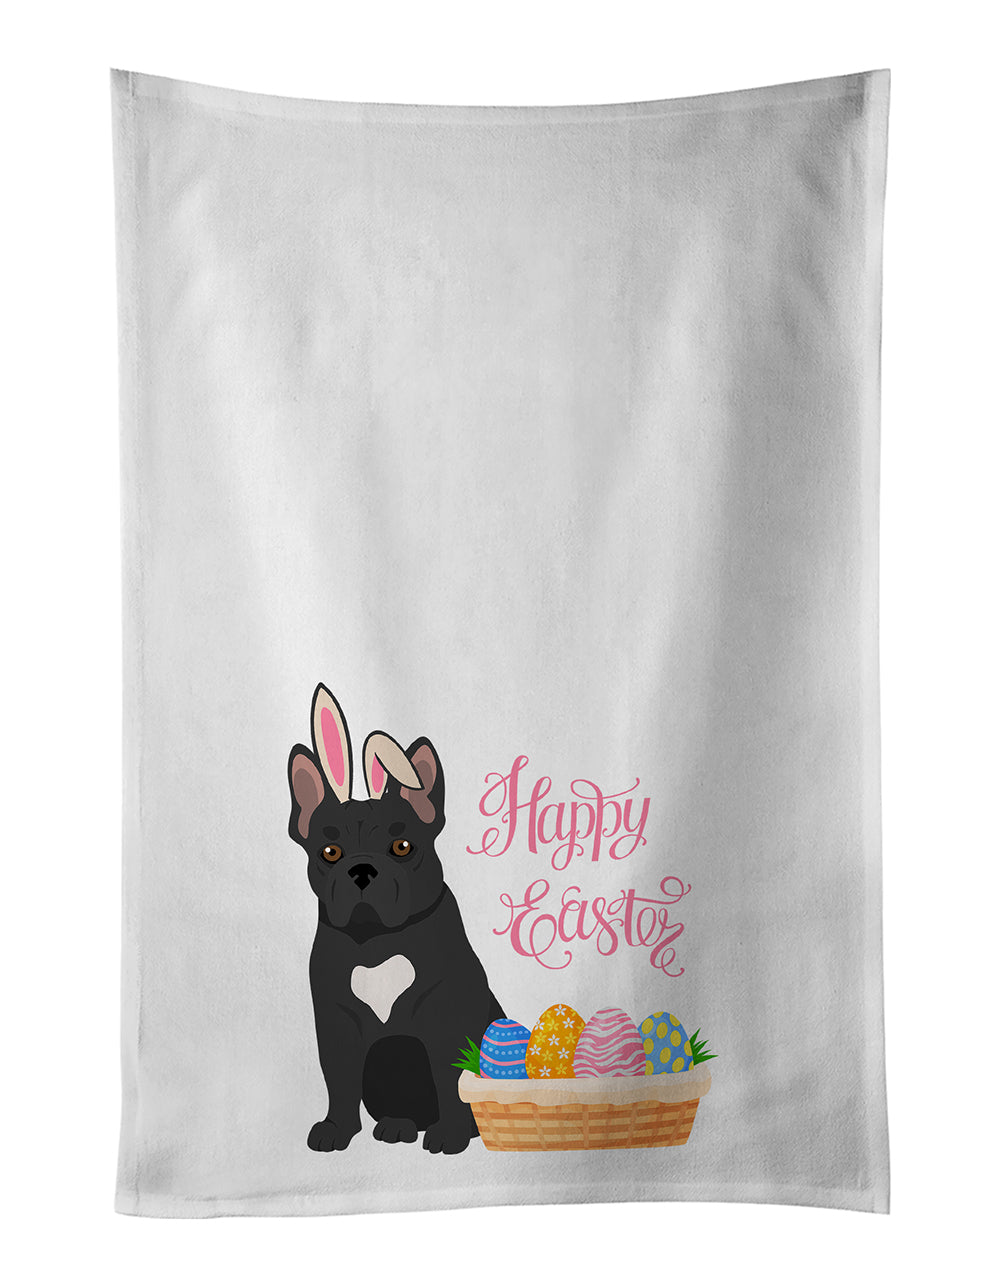 Buy this Black French Bulldog Easter White Kitchen Towel Set of 2 Dish Towels